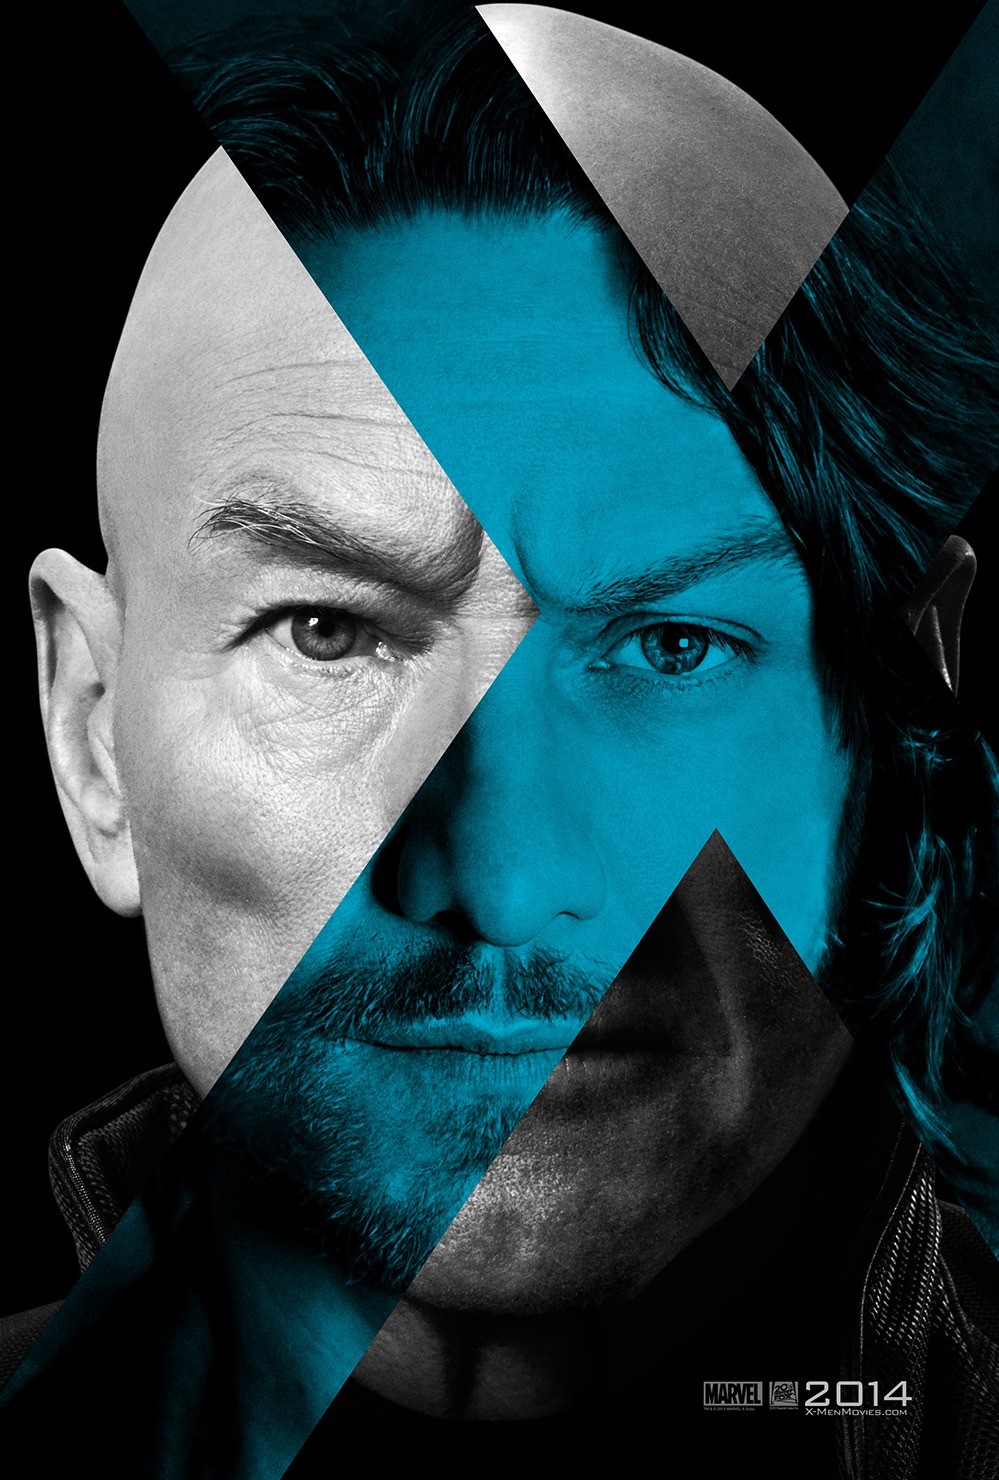 Extra Large Movie Poster Image for X-Men: Days of Future Past (#3 of 17)